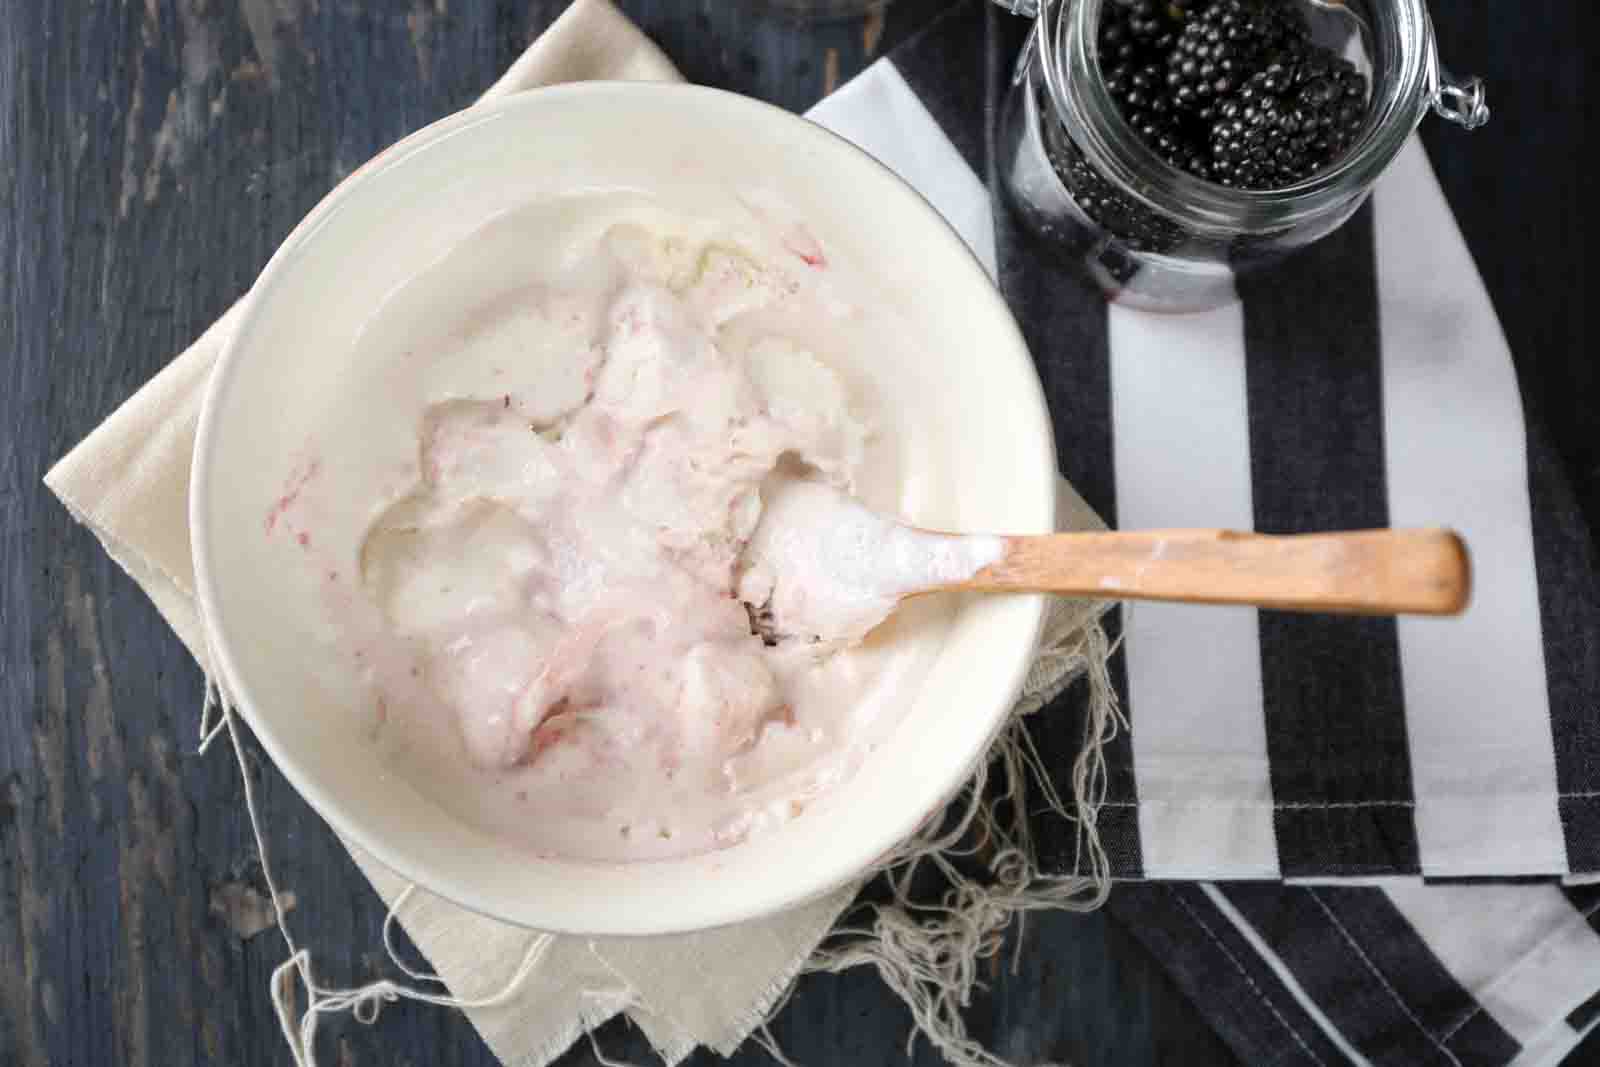 How to Make Snow Ice Cream a Fun Recipe and Snow Day Activity